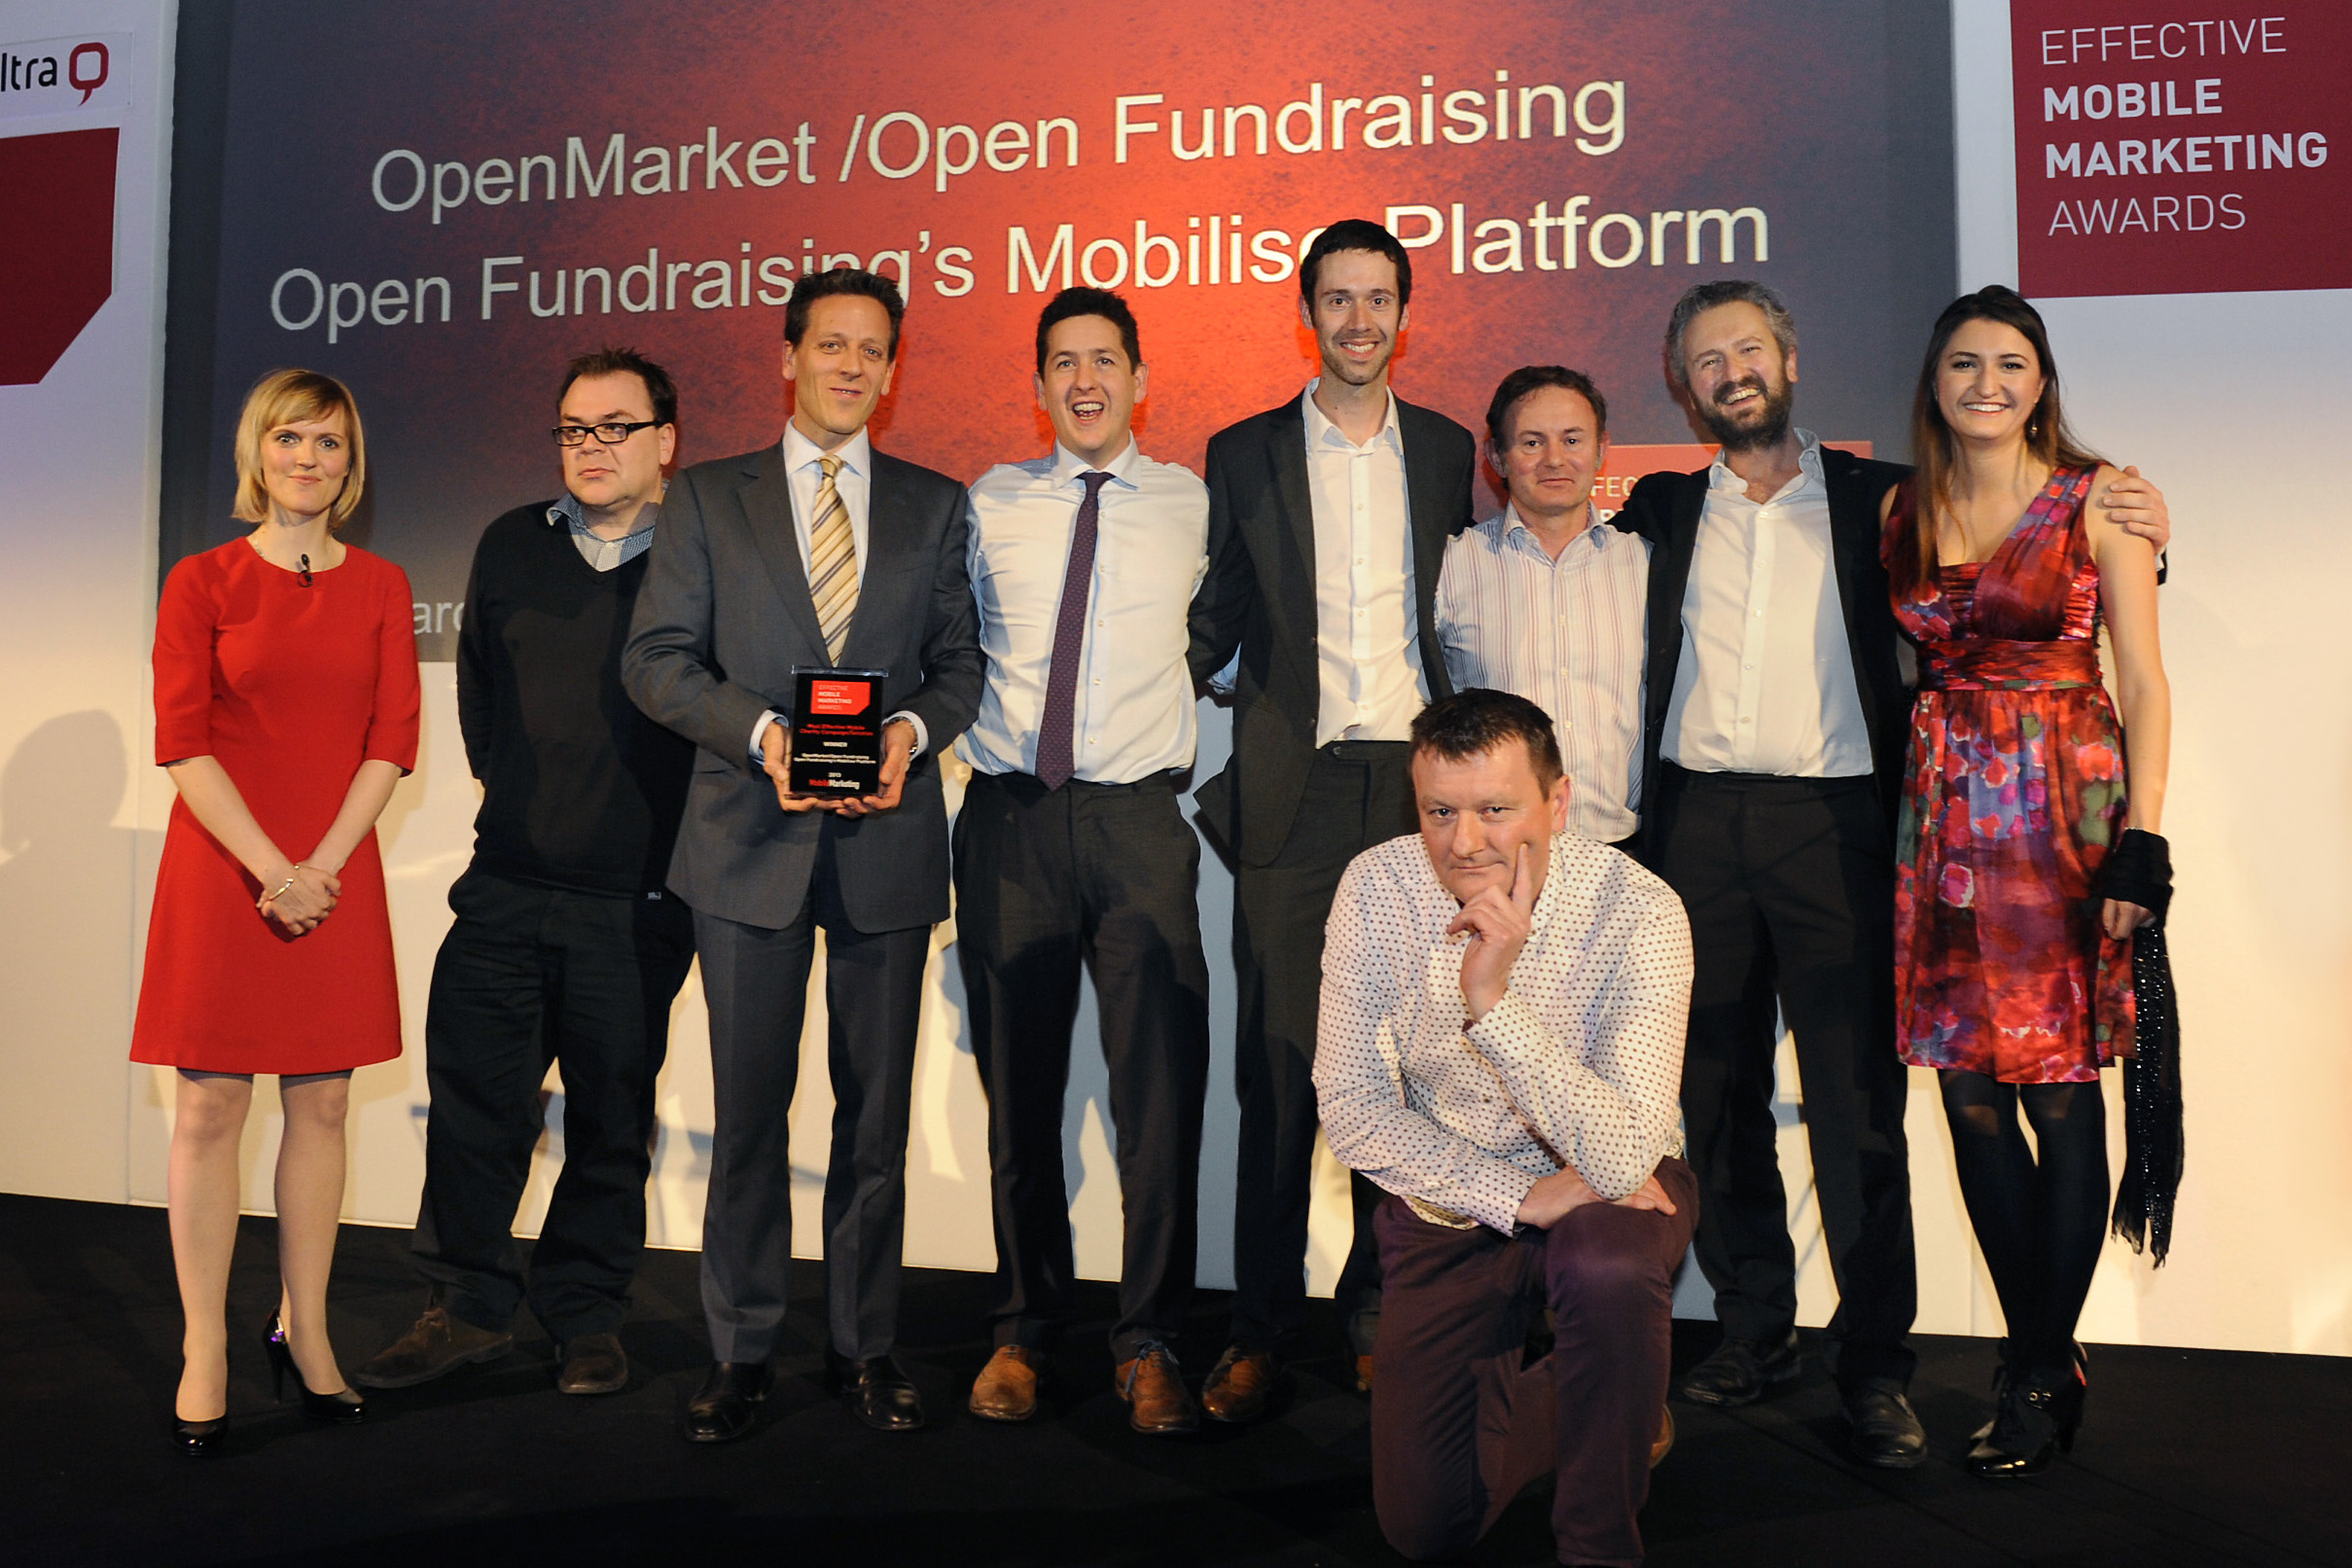 Effective Mobile Marketing Awards – 2013's Winners: Charity Campaign